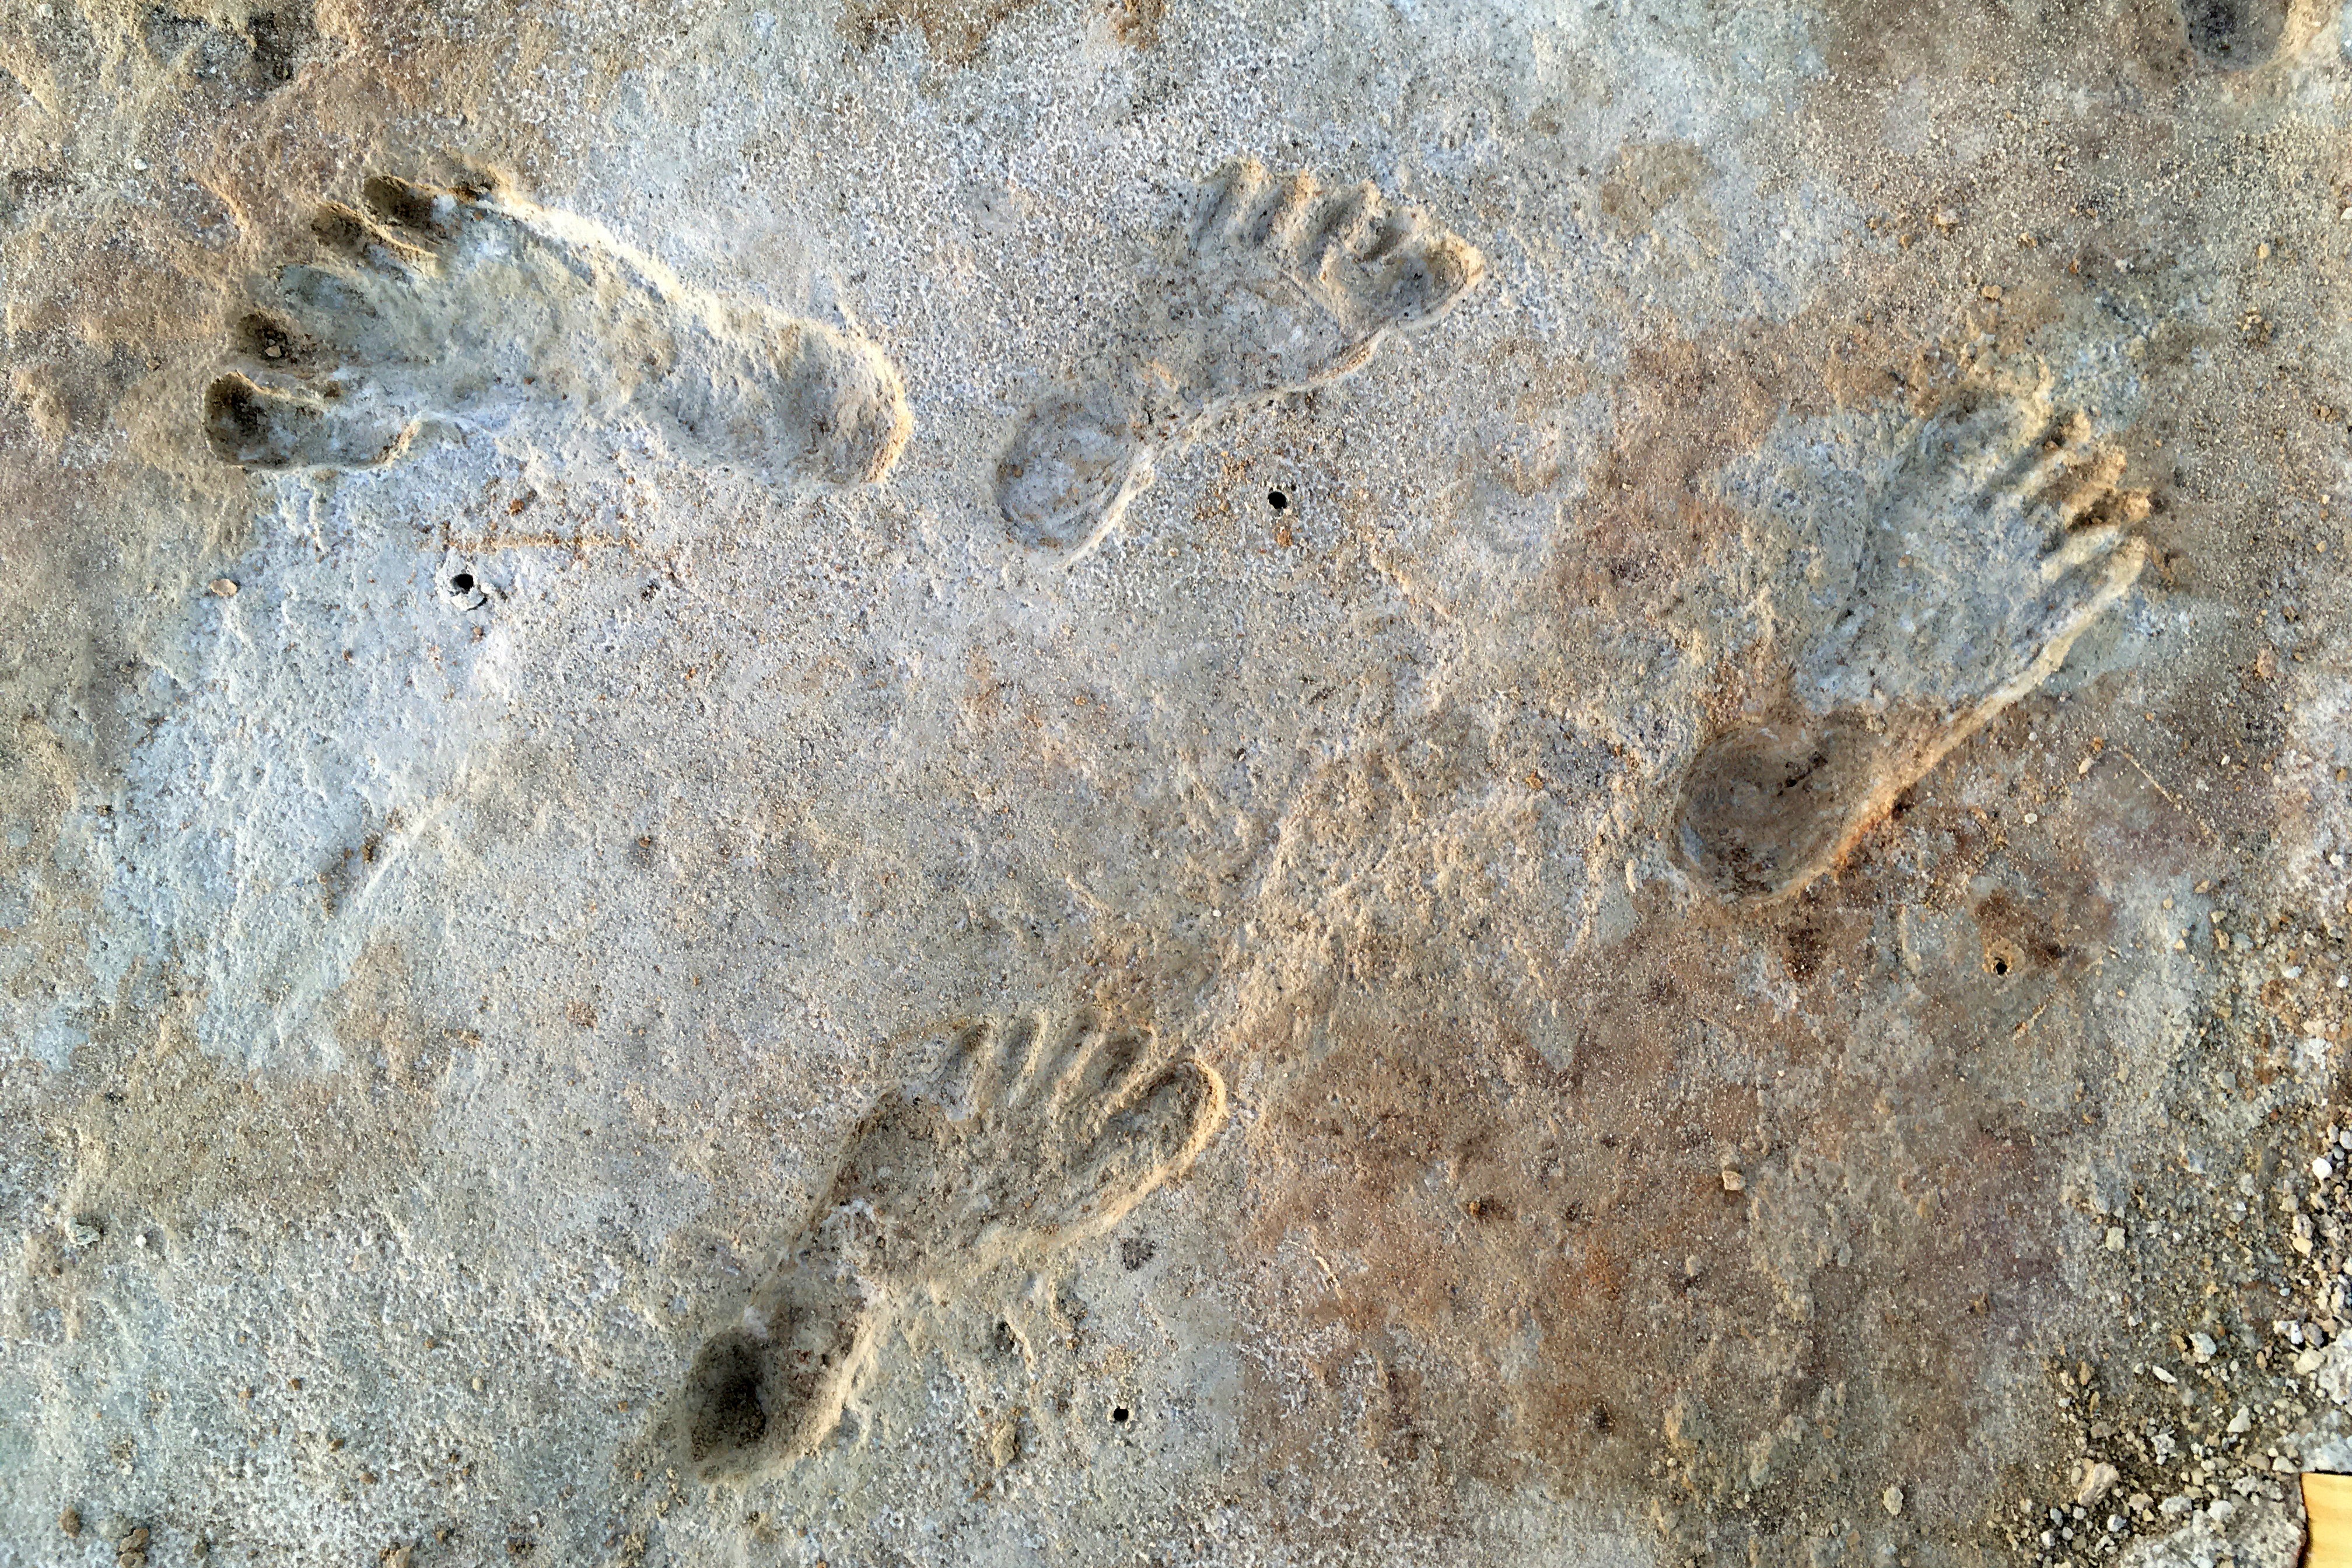 Ancient Footprints Affirm People Lived in the Americas More than 20,000 Years Ago